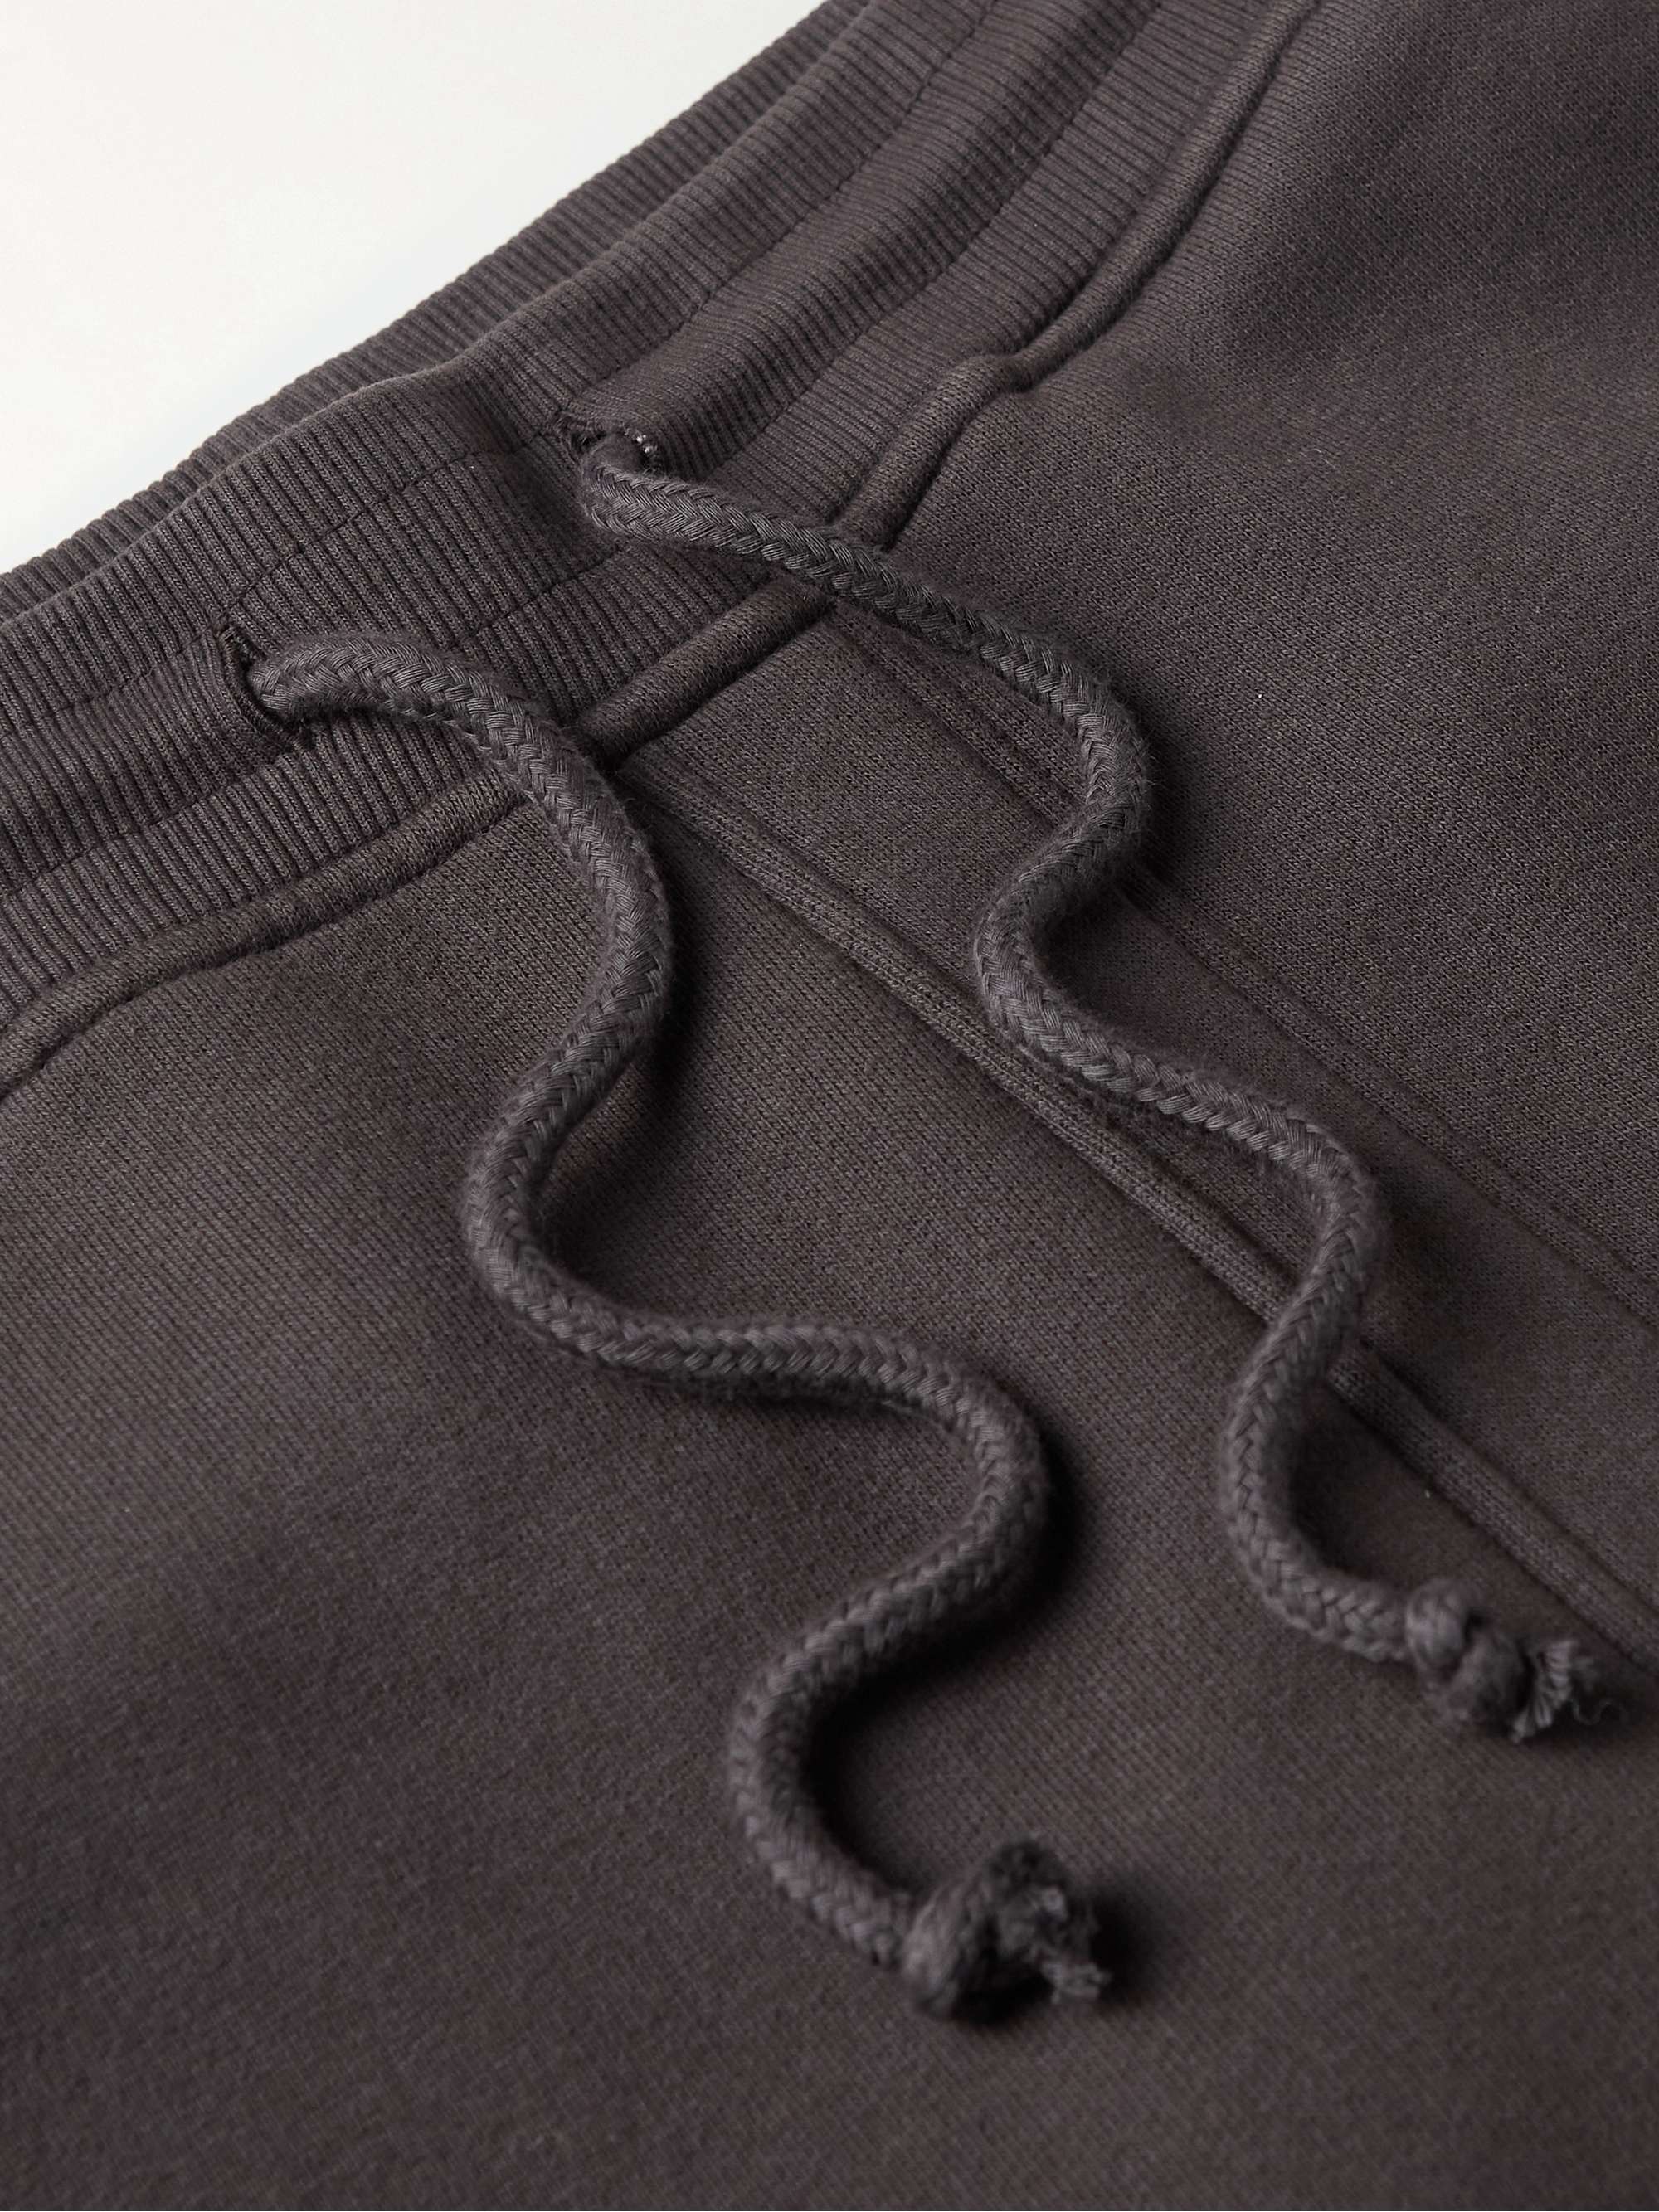 OUTDOOR VOICES Nimbus Tapered Cotton-Jersey Sweatpants